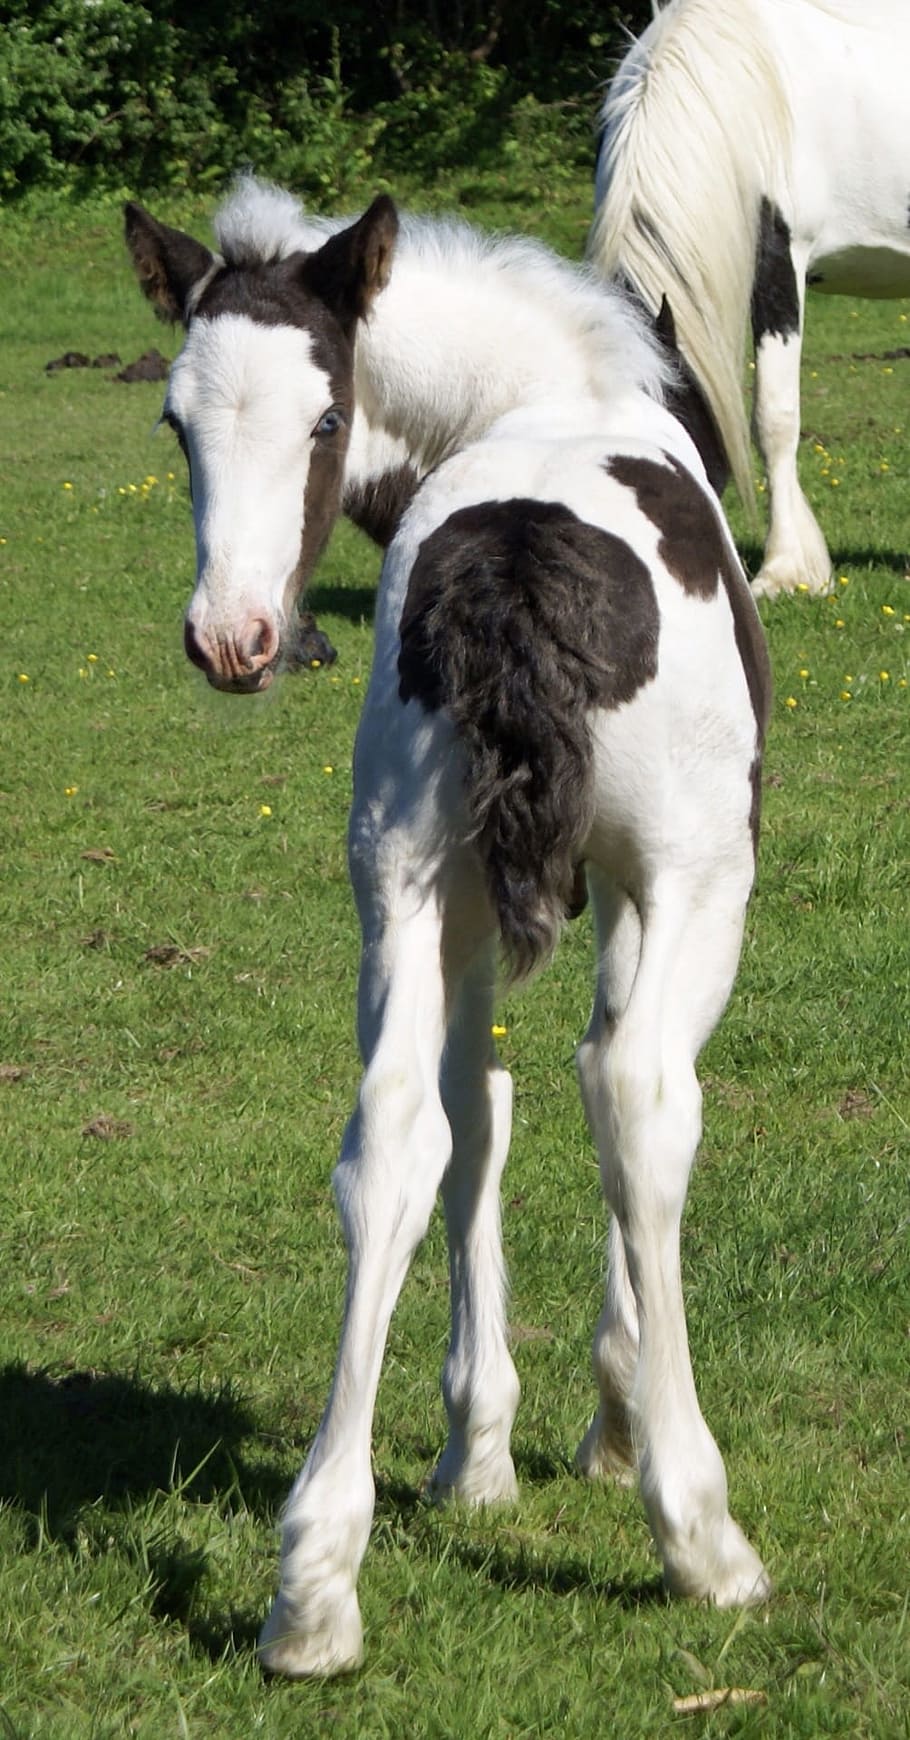 white and black horse, Foal, Bottom, Piebald, skewbald young